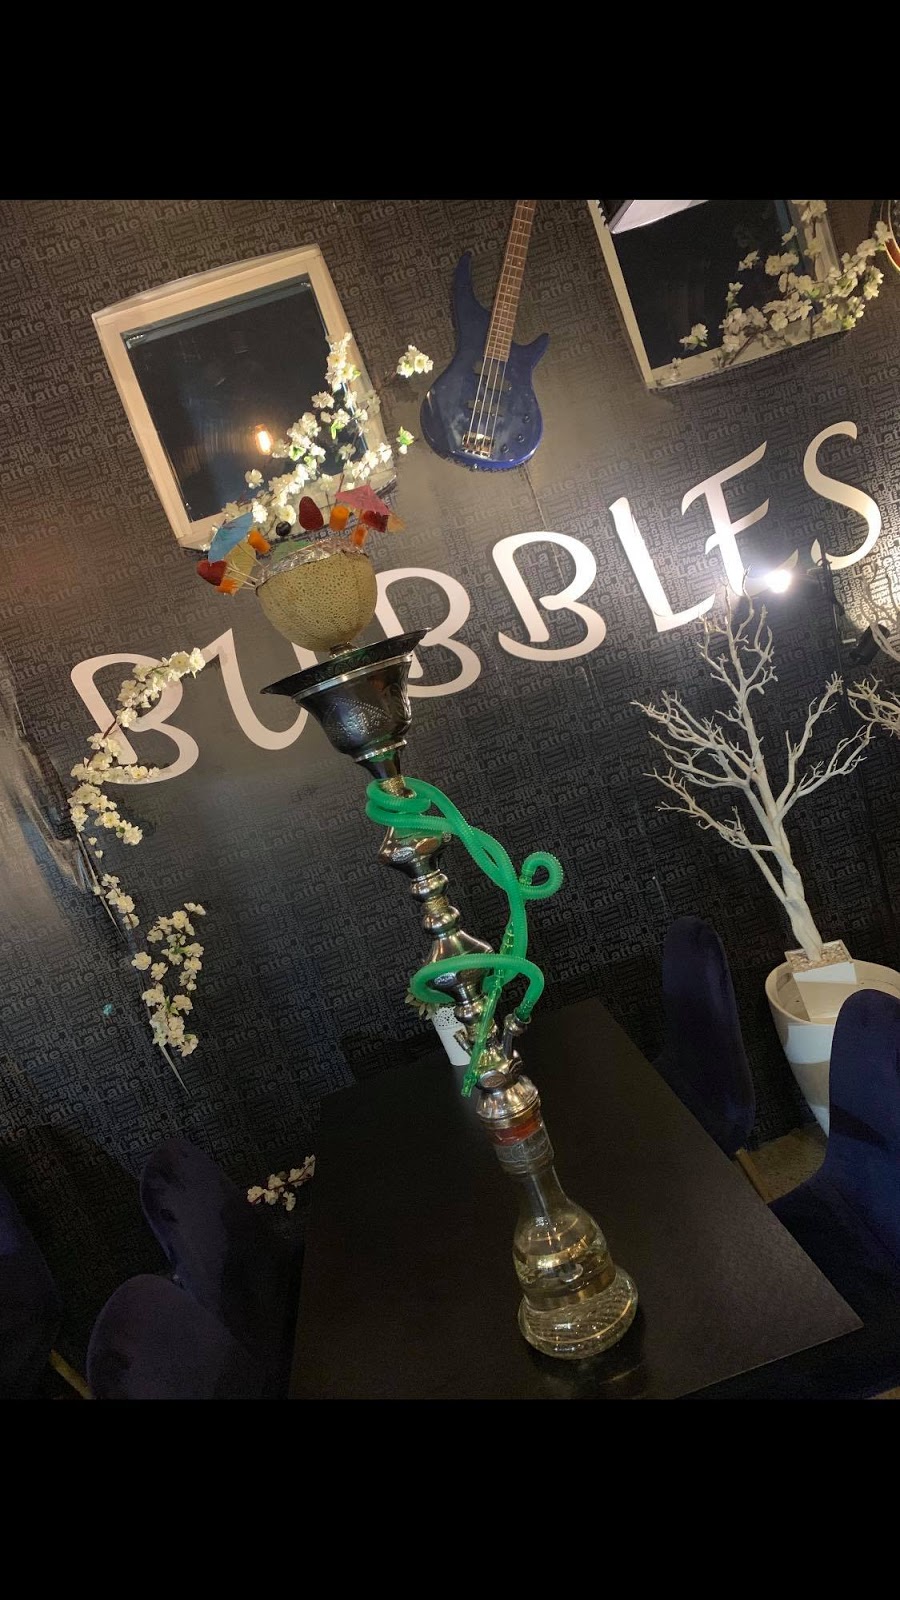 Bubbles Shisha Cafe | cafe | 924 Hume Hwy, Bass Hill NSW 2197, Australia | 0414423328 OR +61 414 423 328